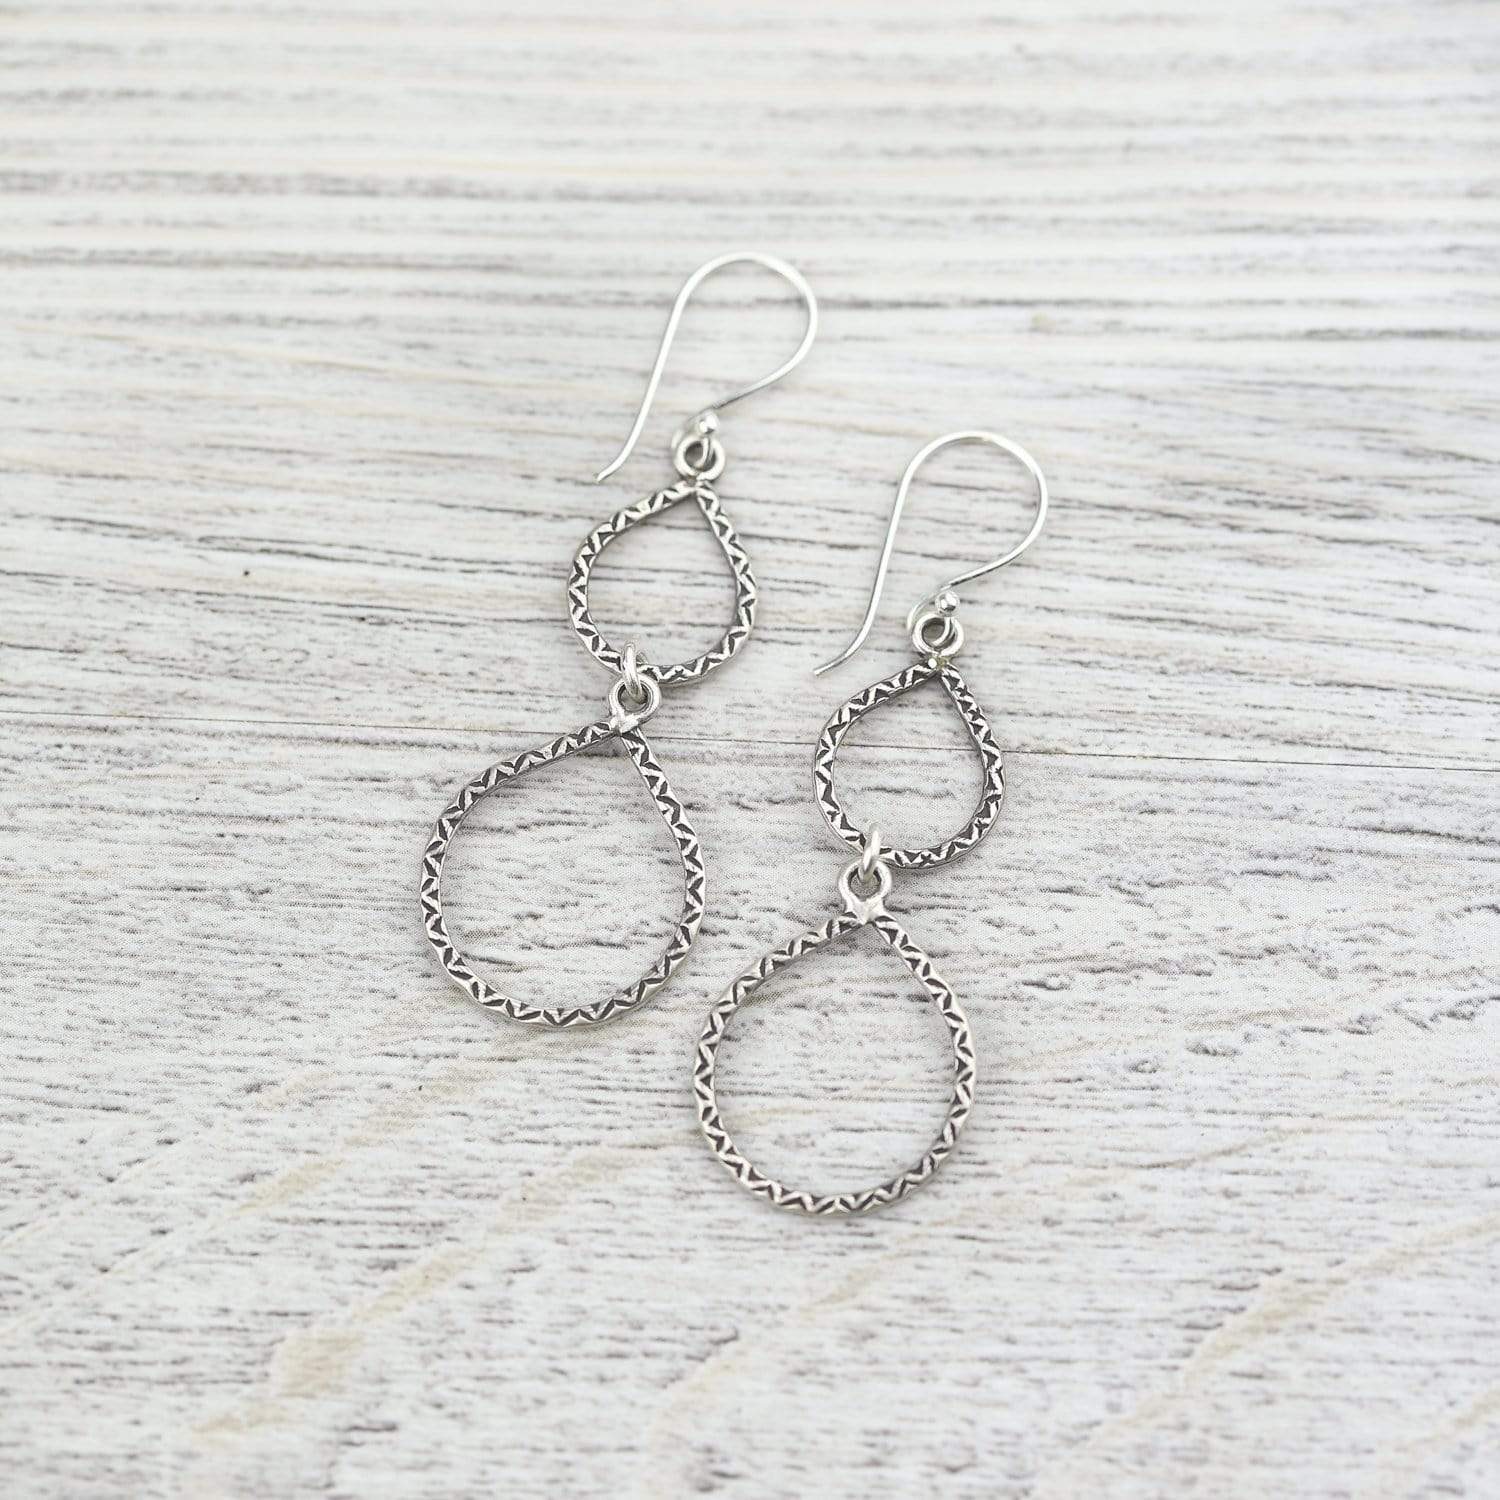 Thai Silver Happiness Earrings